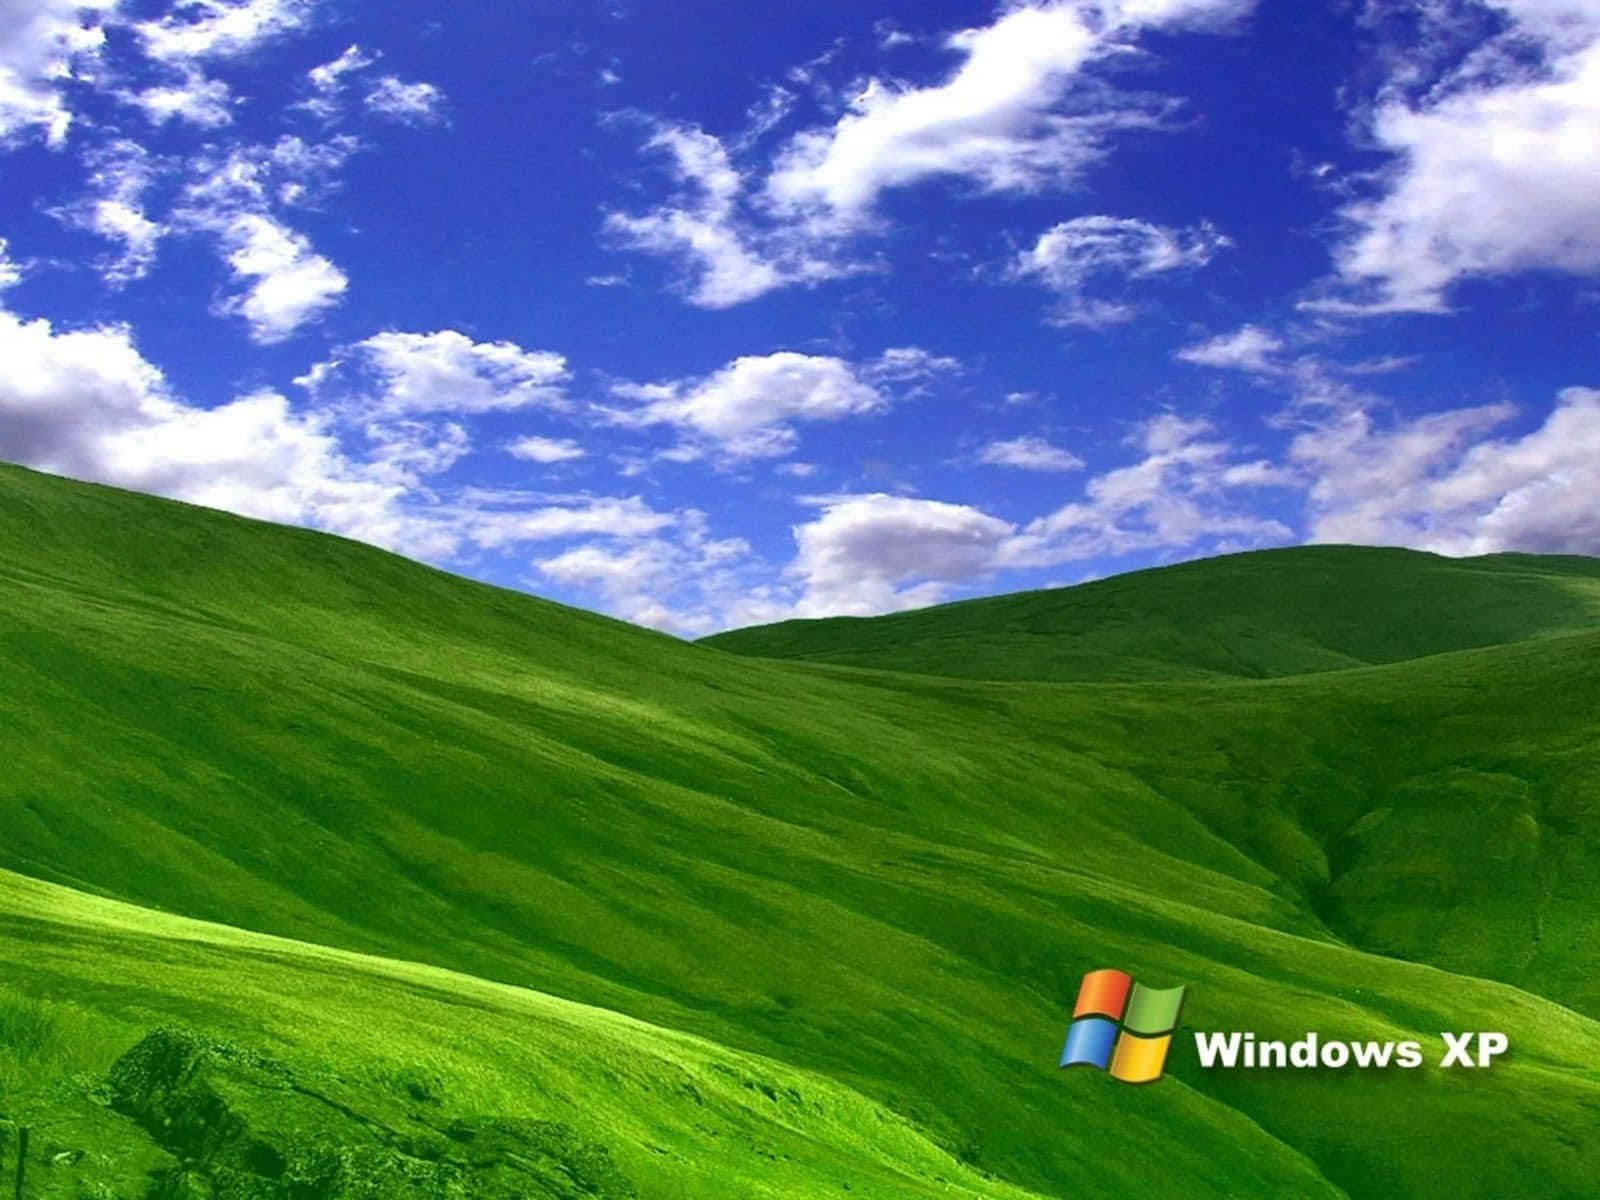 100+] Windows Xp Pictures | Wallpapers.Com